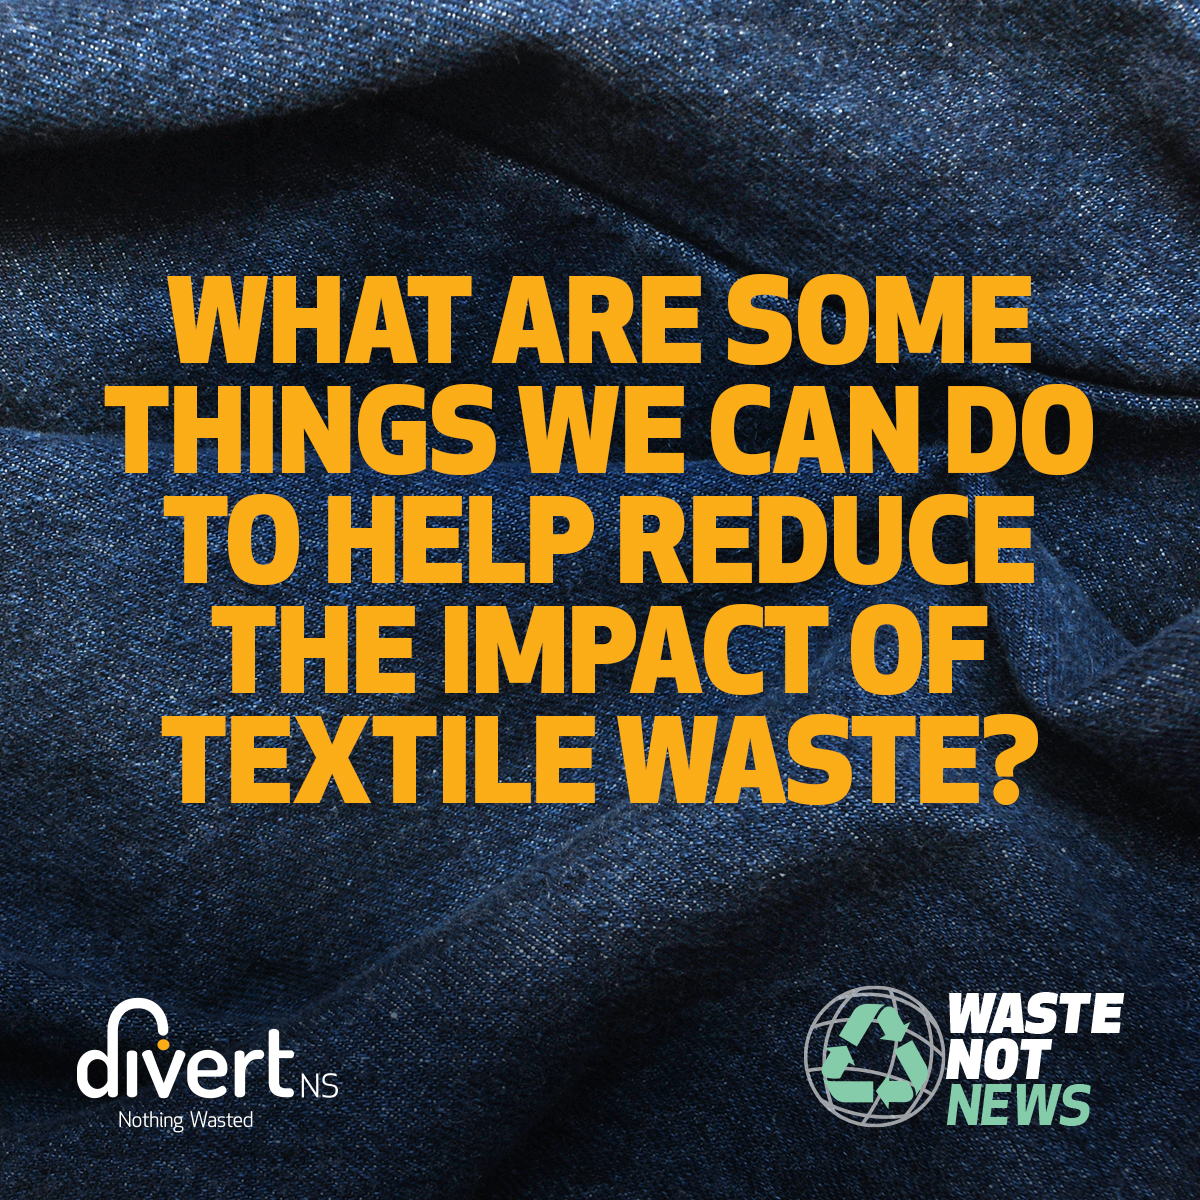 ‘Fast Fashion’ has led to people buying and disposing of more clothes than ever before. Textiles now take up over 9% of landfill space in Nova Scotia. Let’s help students change this by asking what they can do to help reduce the impact of textile waste. divertns.ca/learn.